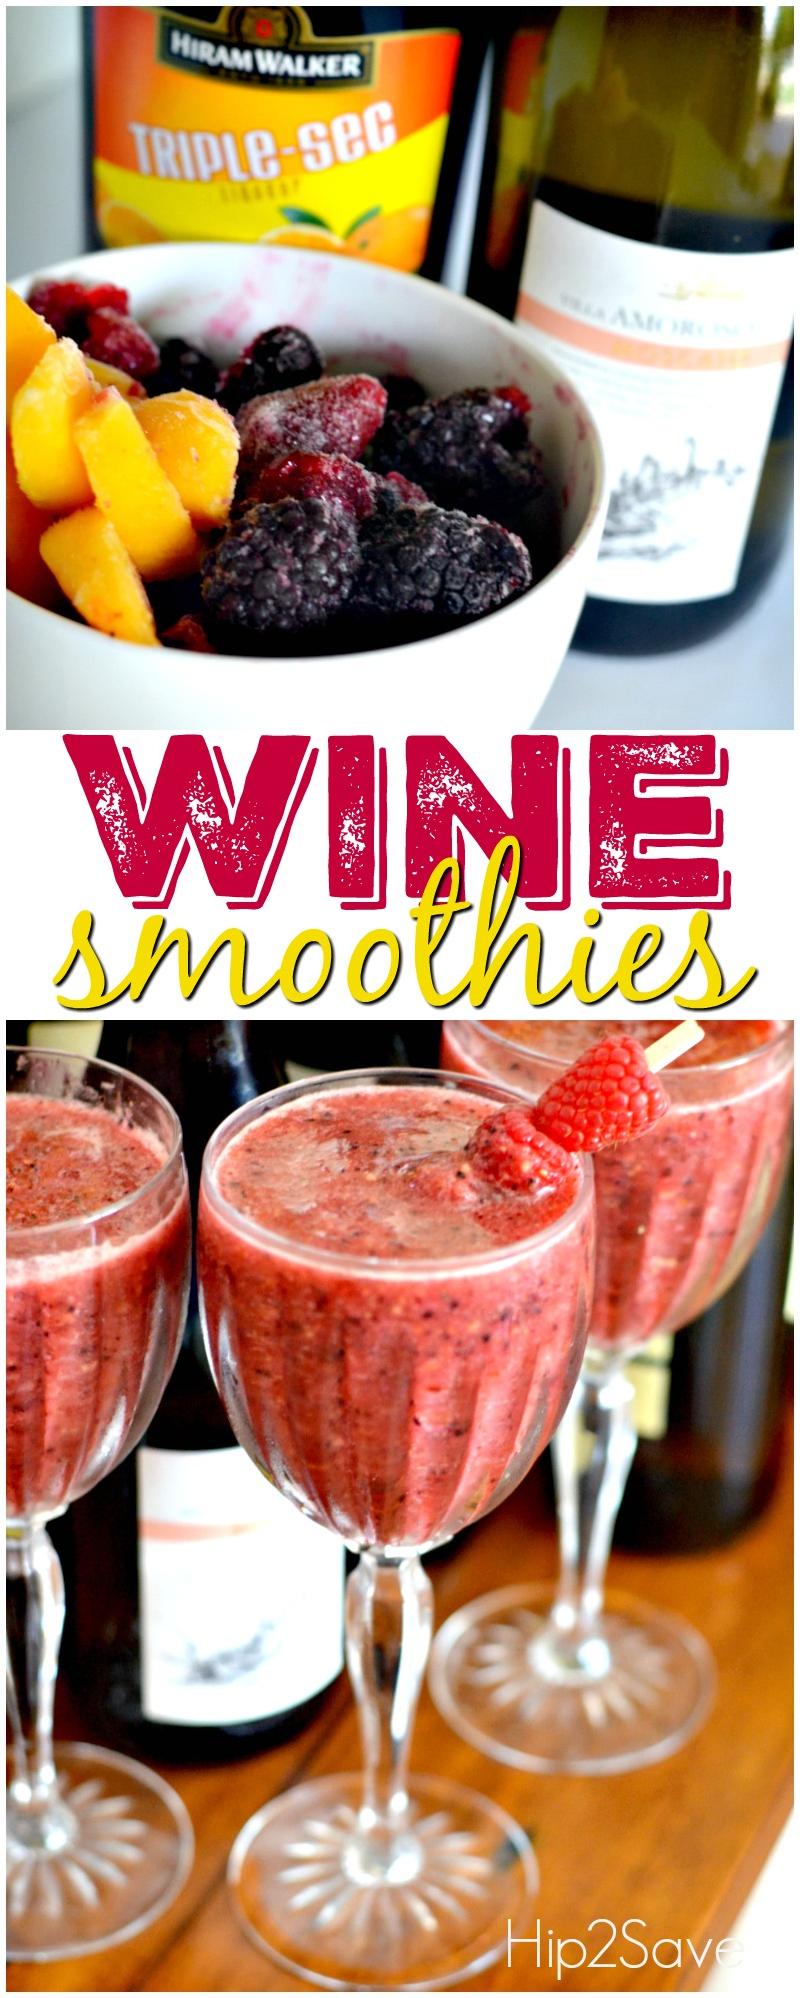  This smoothie is so good, you won't even taste the wine!